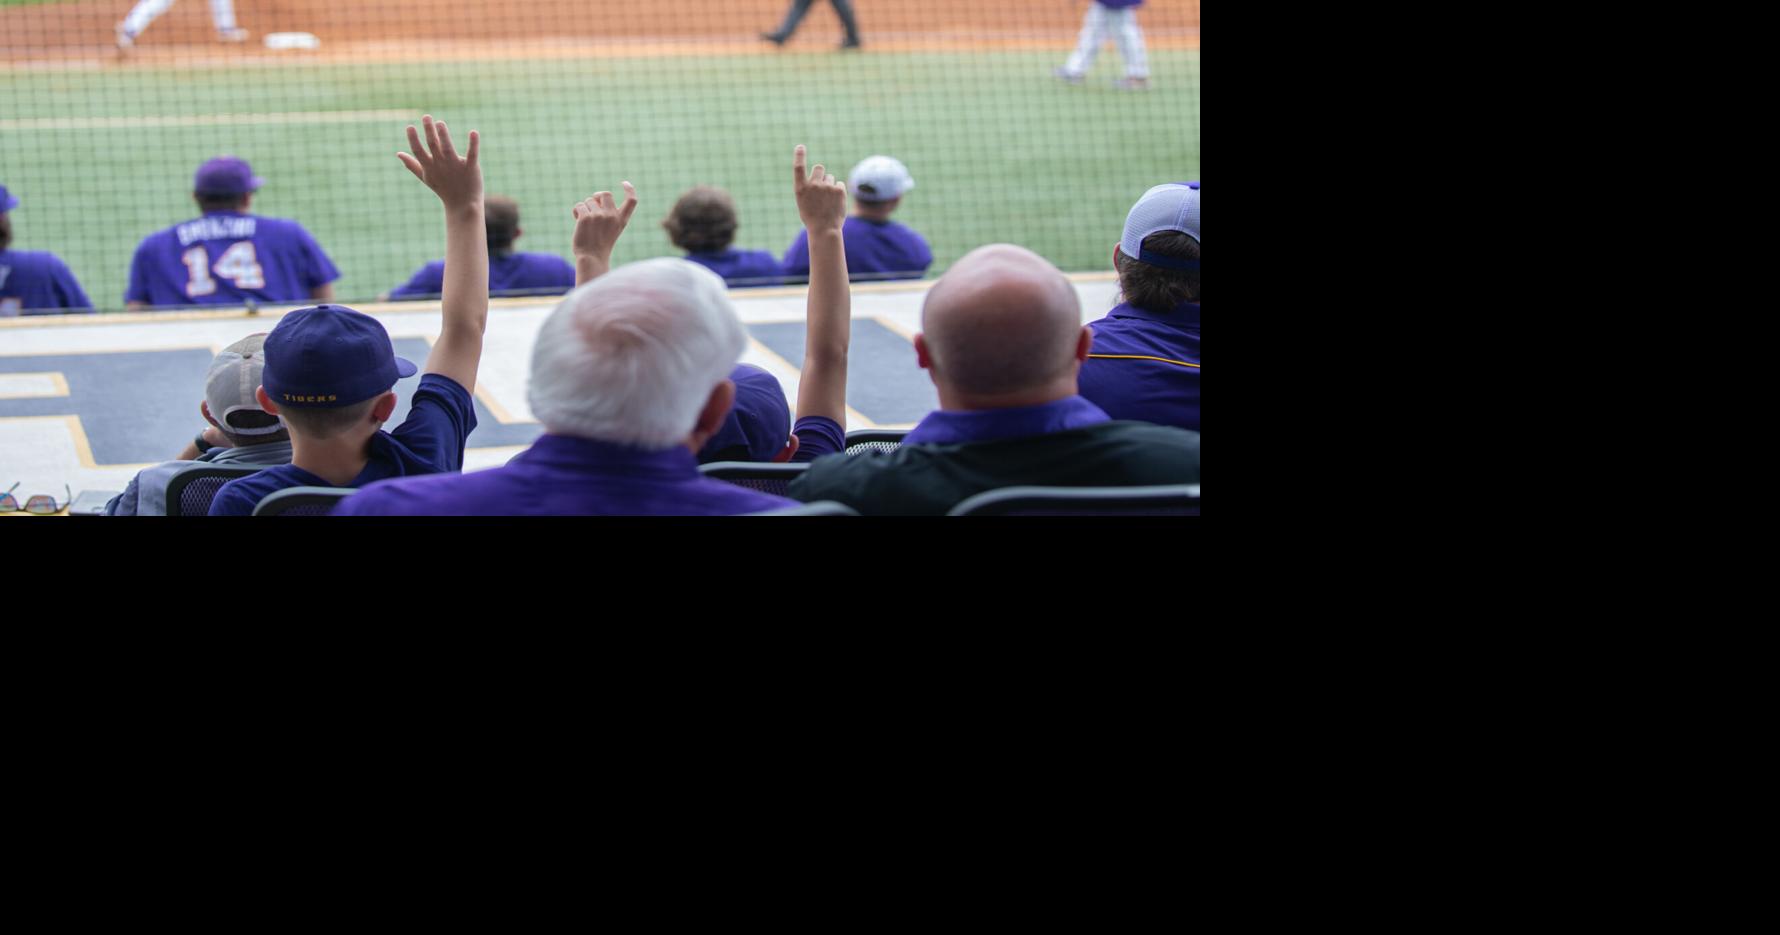 LSU baseball loses to Nicholls State in second straight midweek loss